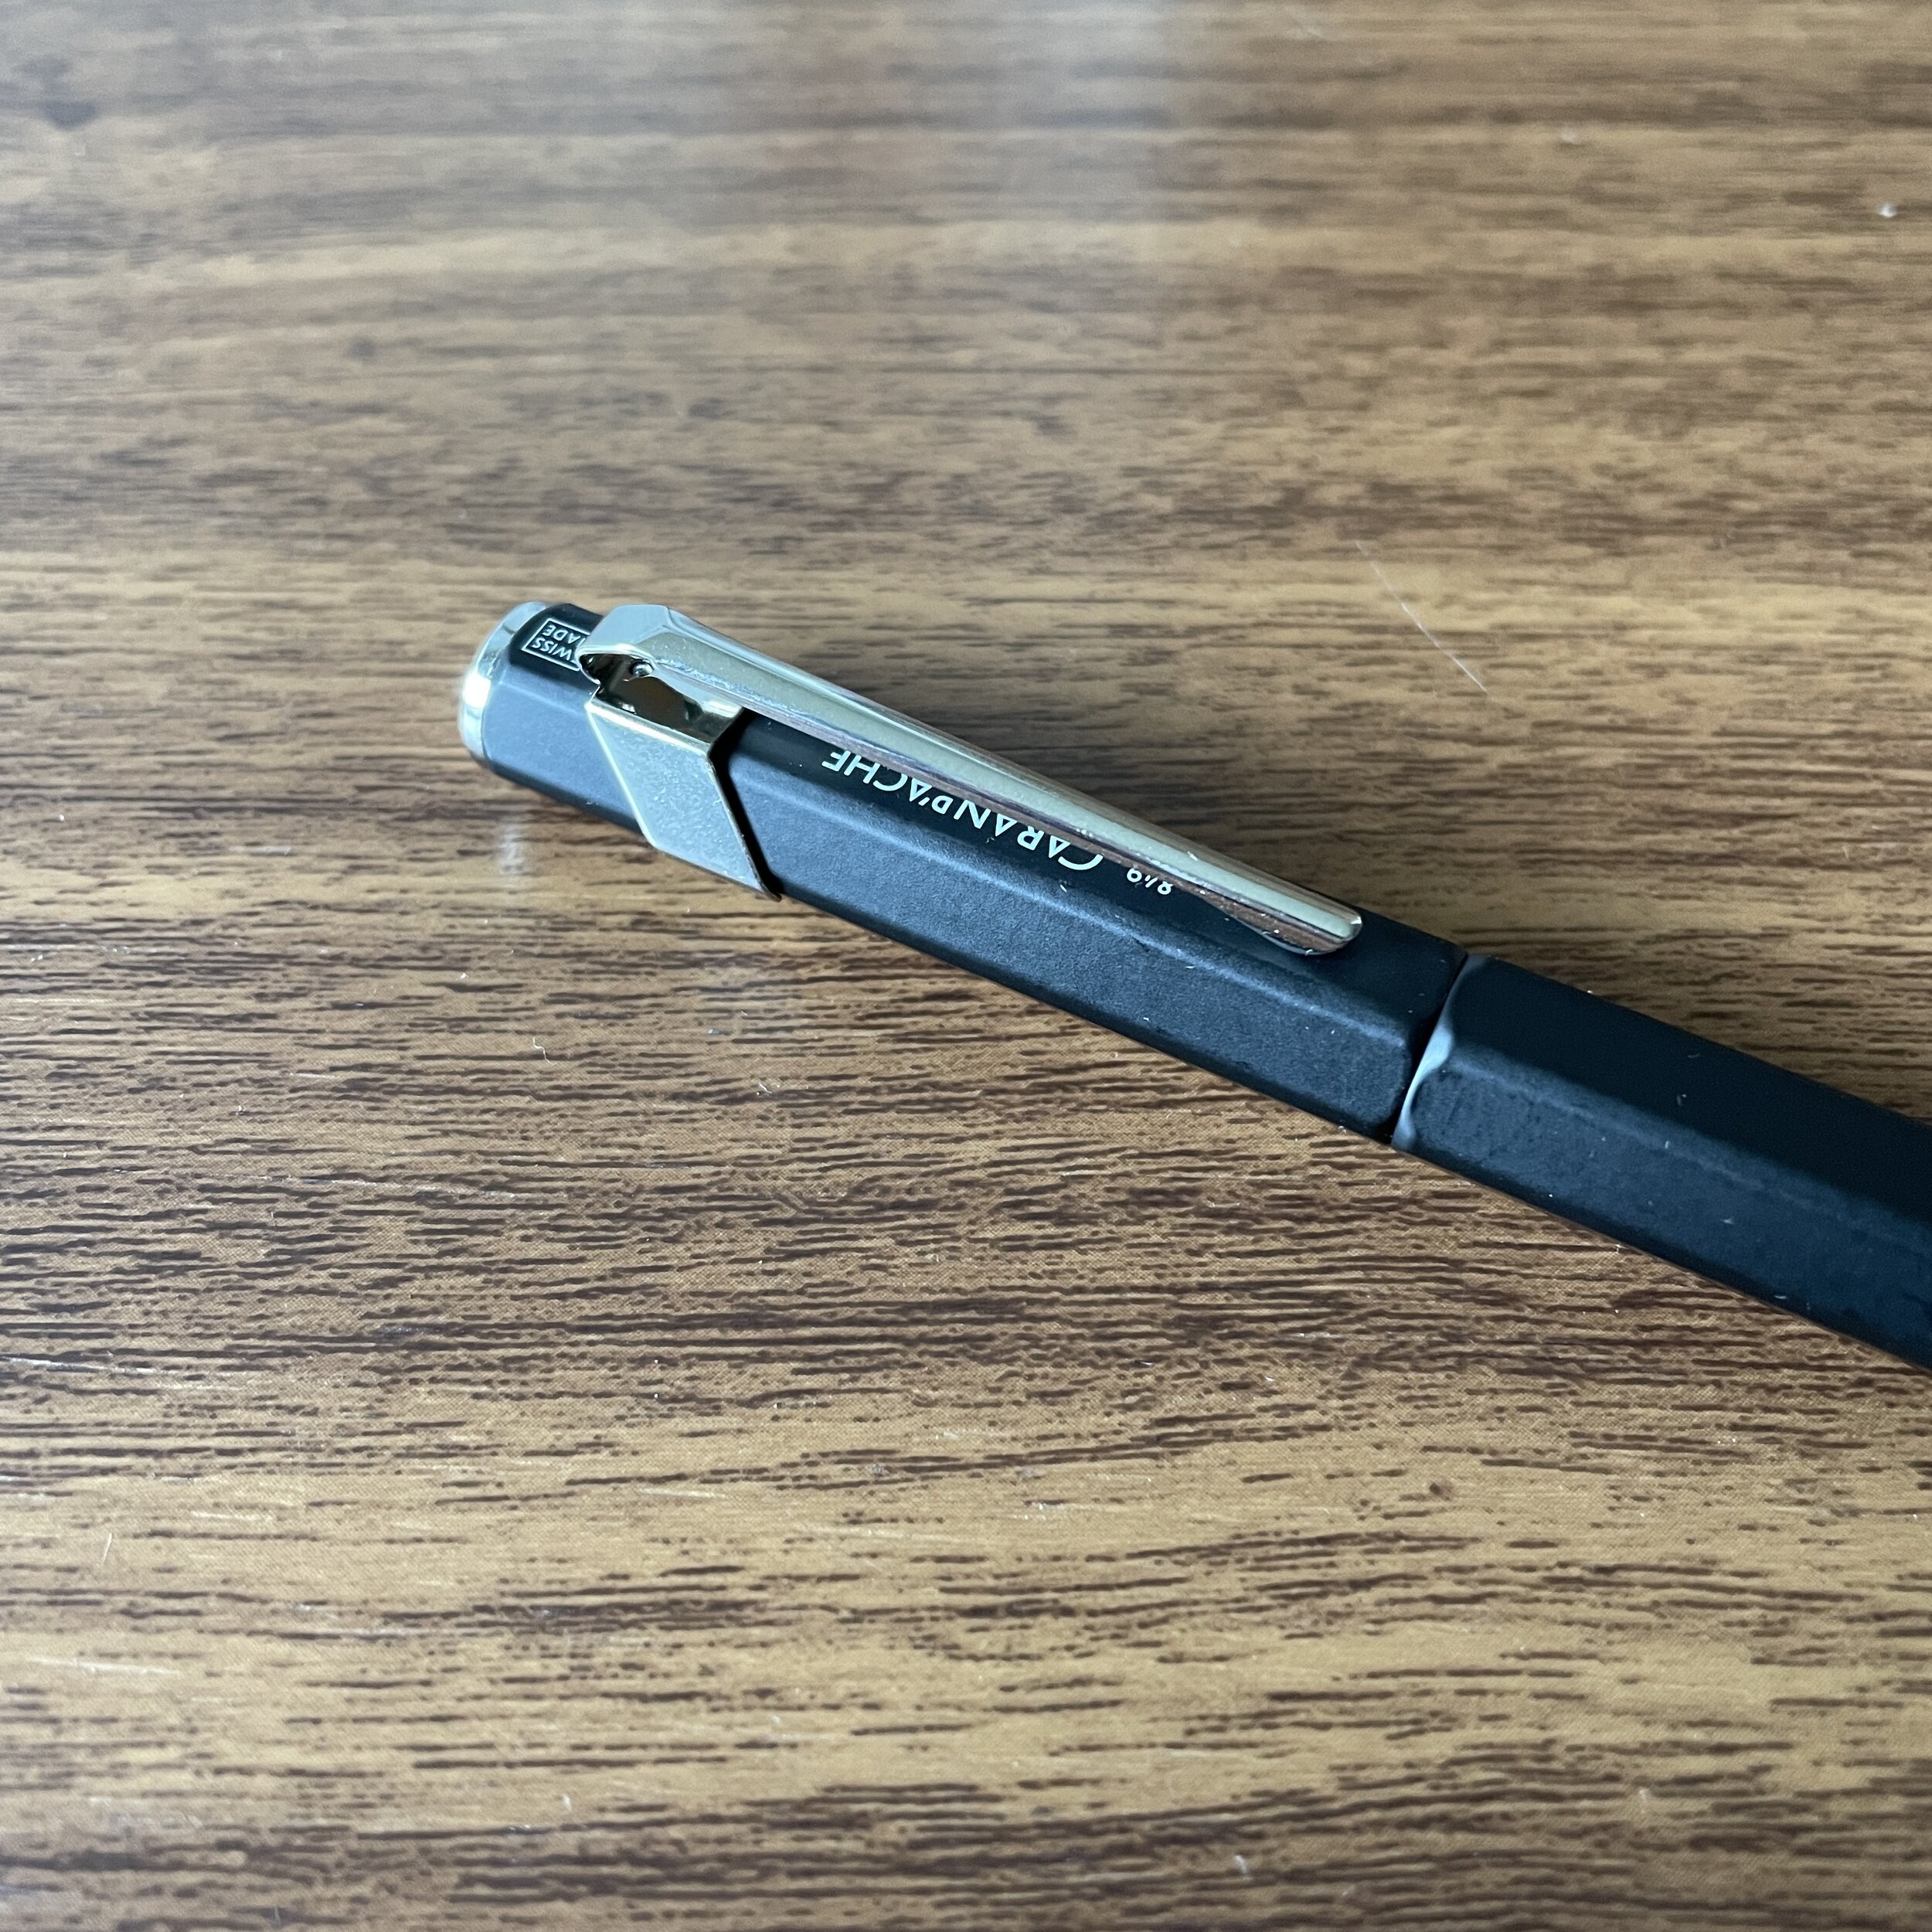 Pen Review: Caran D'Ache 849 Fountain Pen - The Well-Appointed Desk